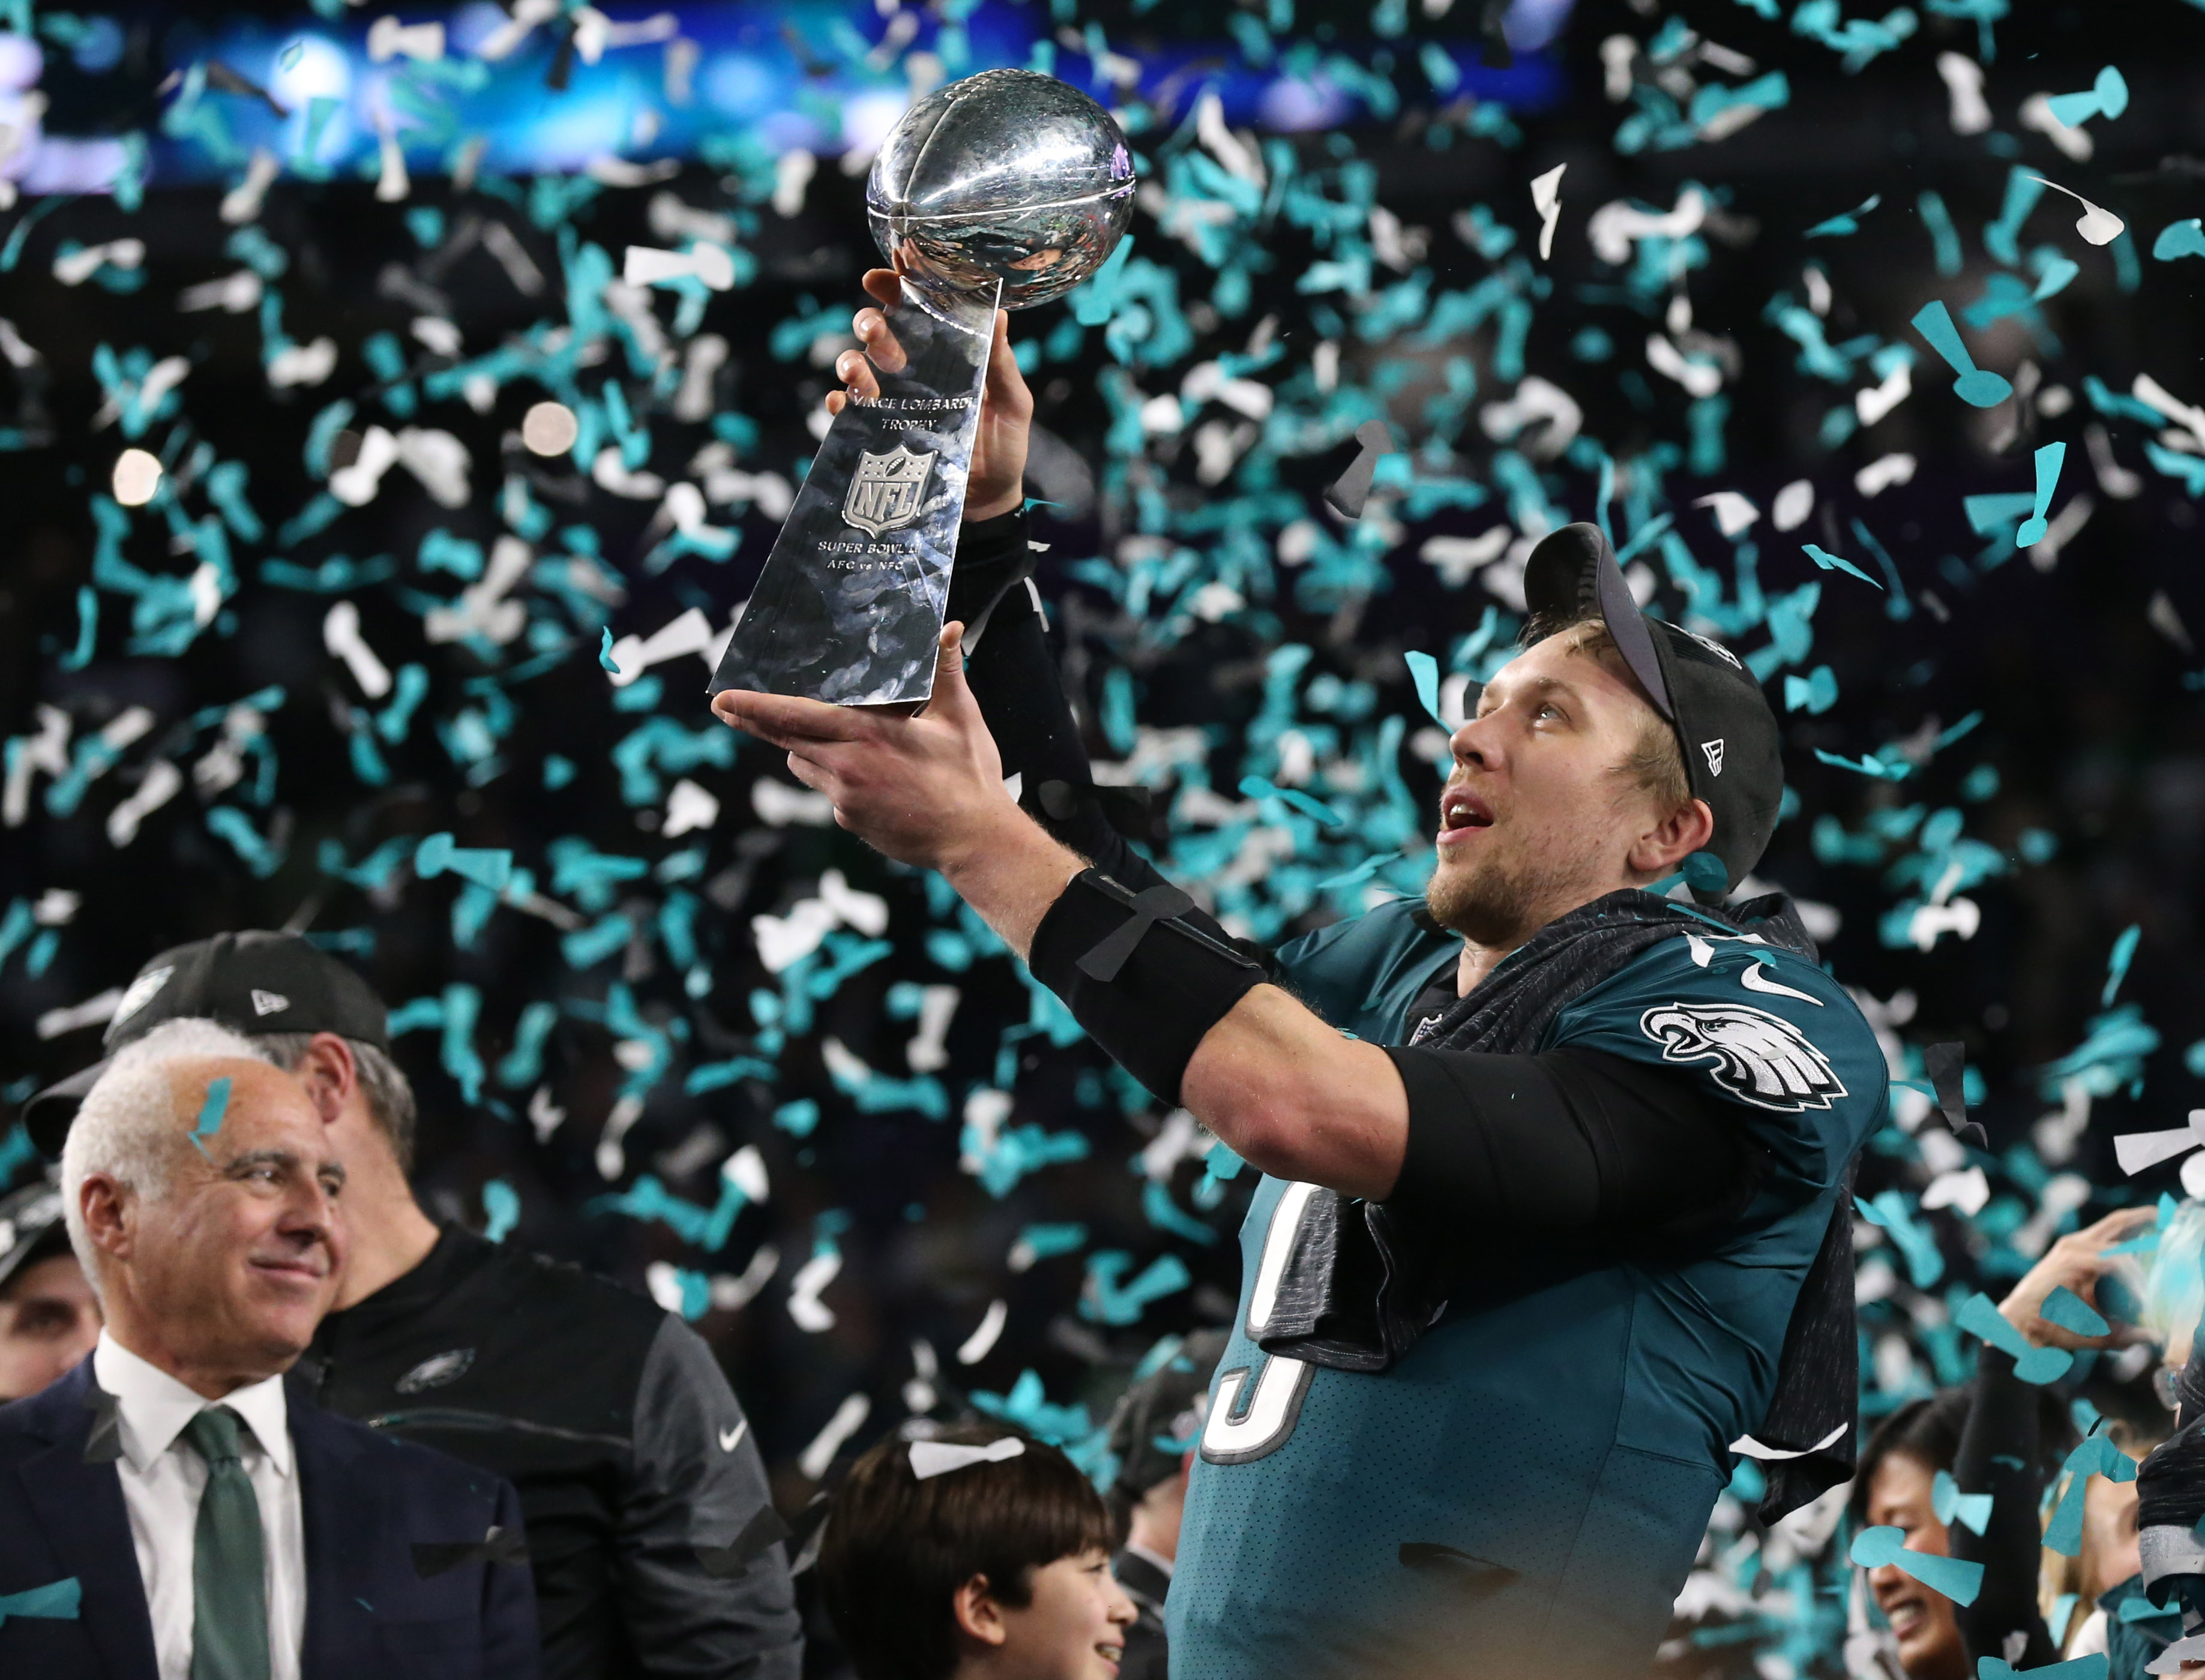 Nick Foles: From Back Up to Super Bowl Champion - ESPN 98.1 FM - 850 AM